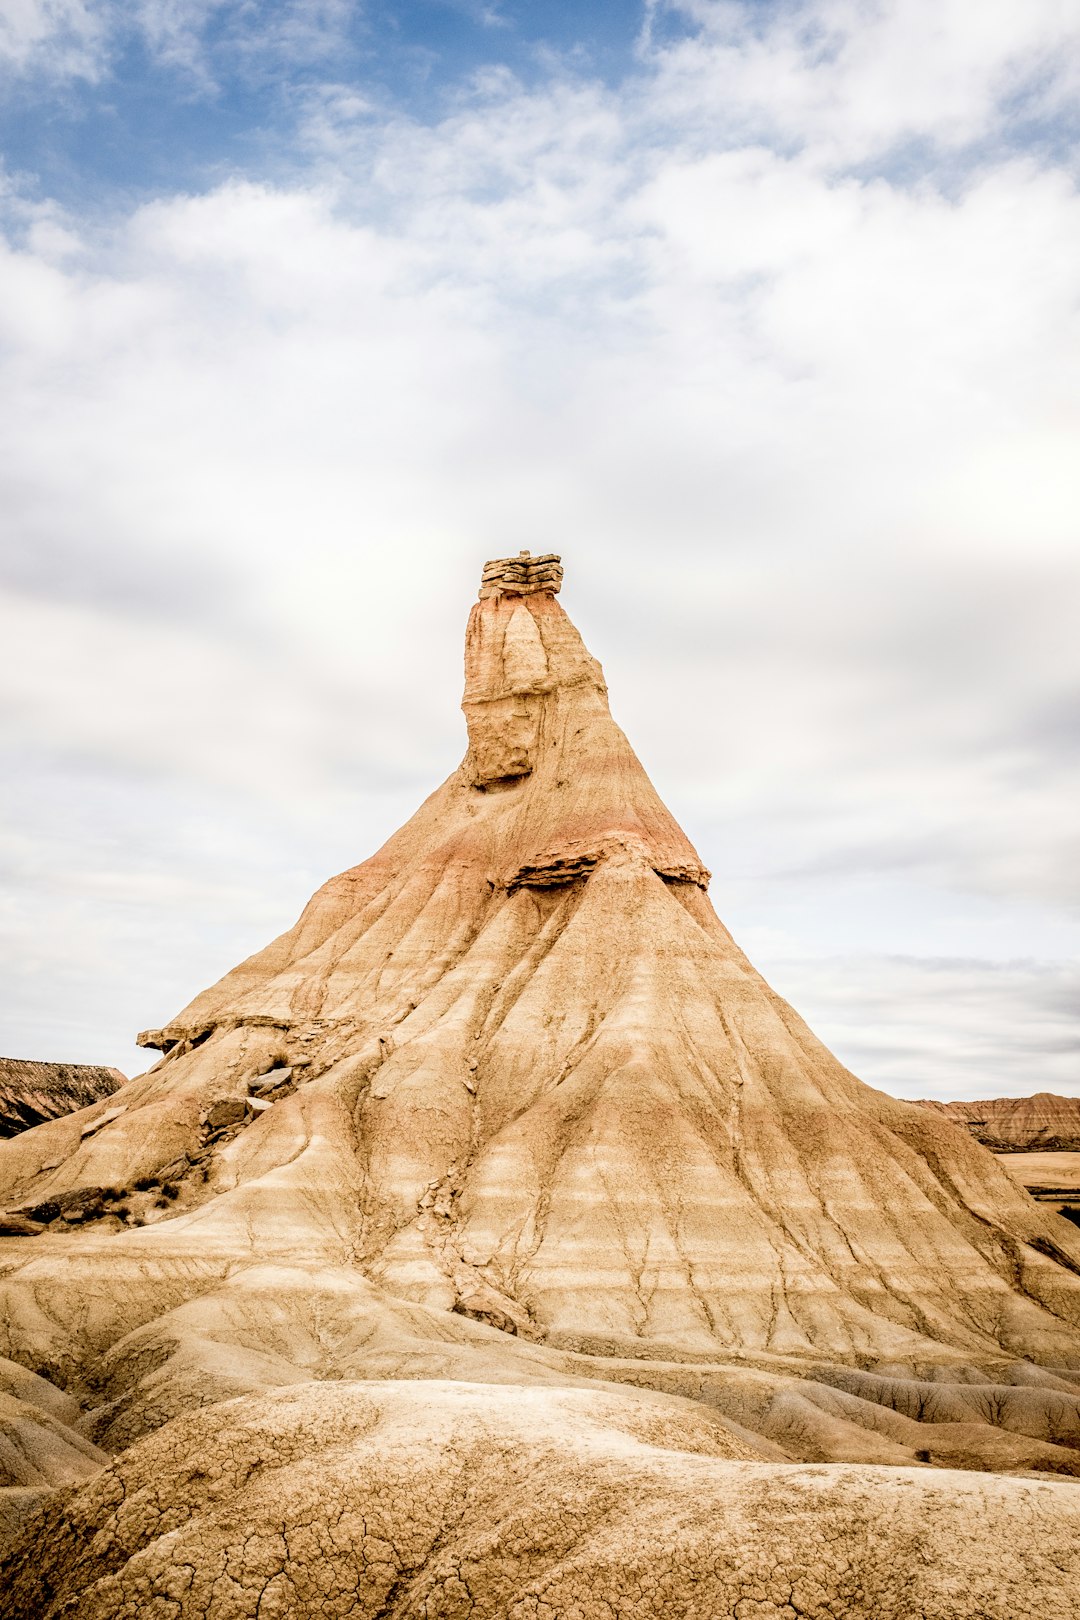 Travel Tips and Stories of Bardenas Reales in Spain